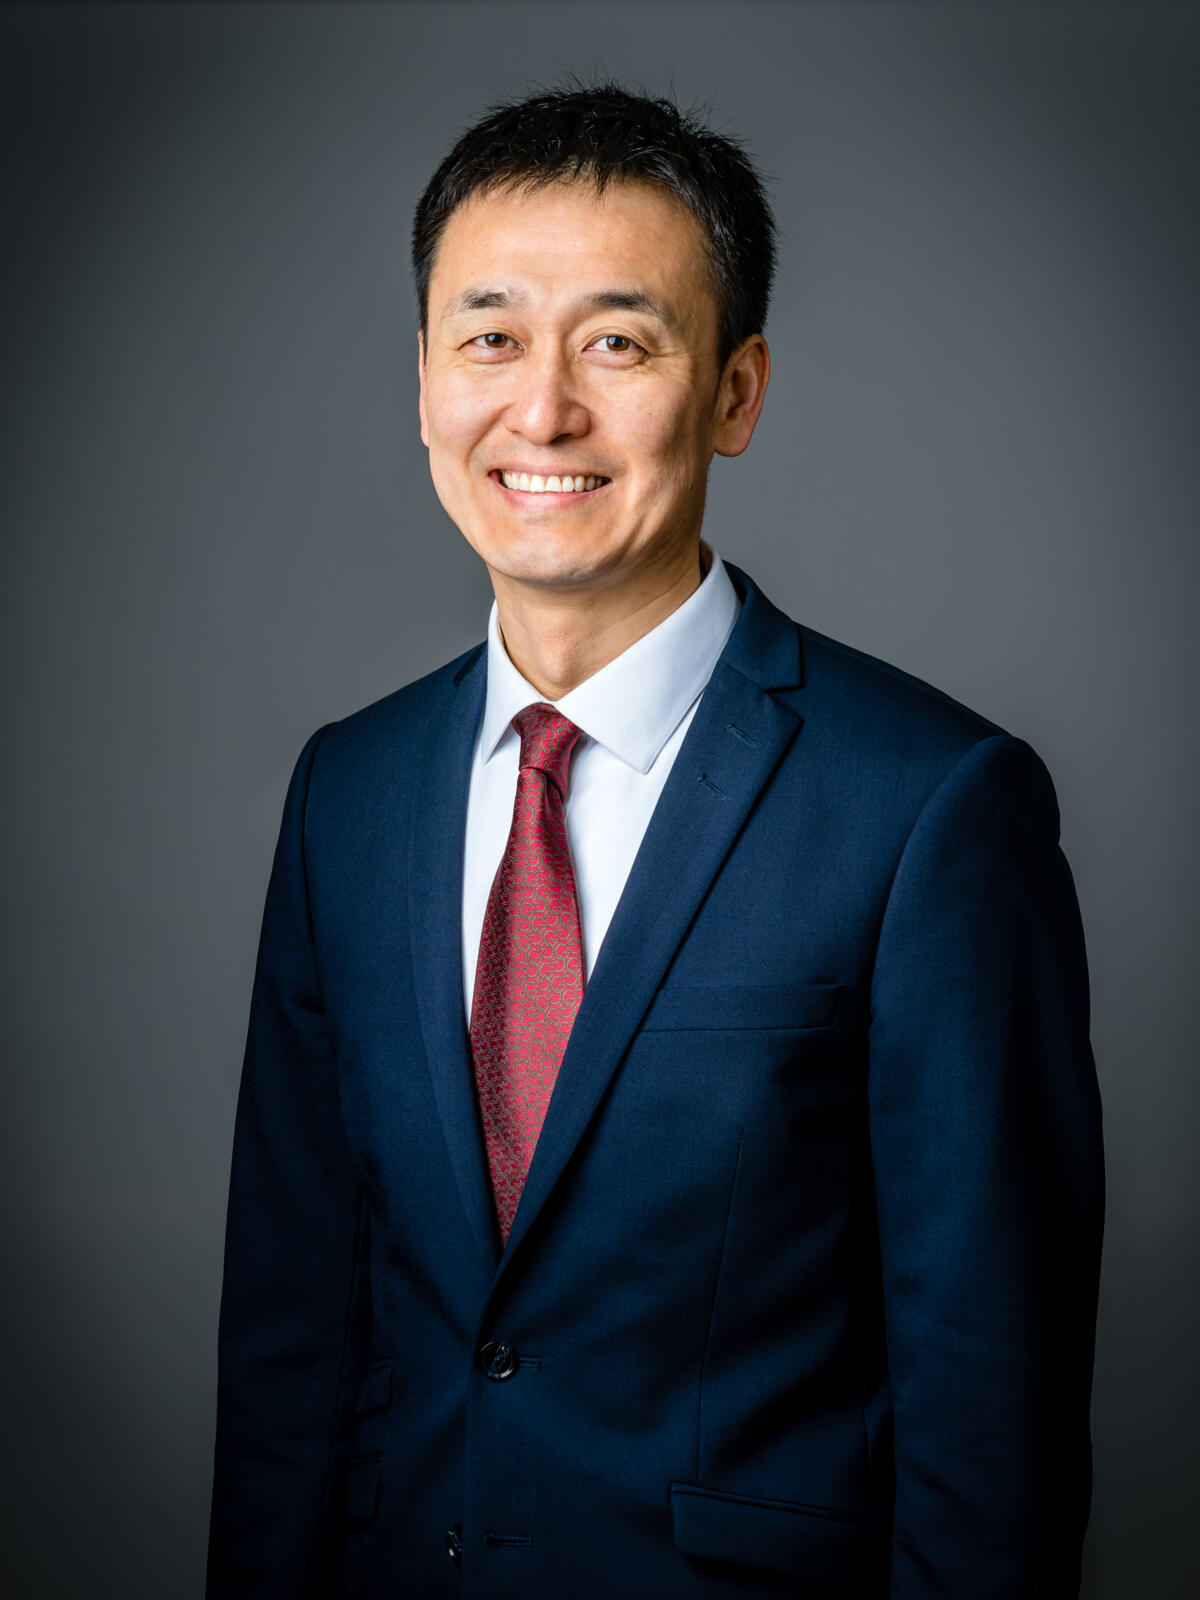 Leo Wang is the new CEO of Swiss Education Group.